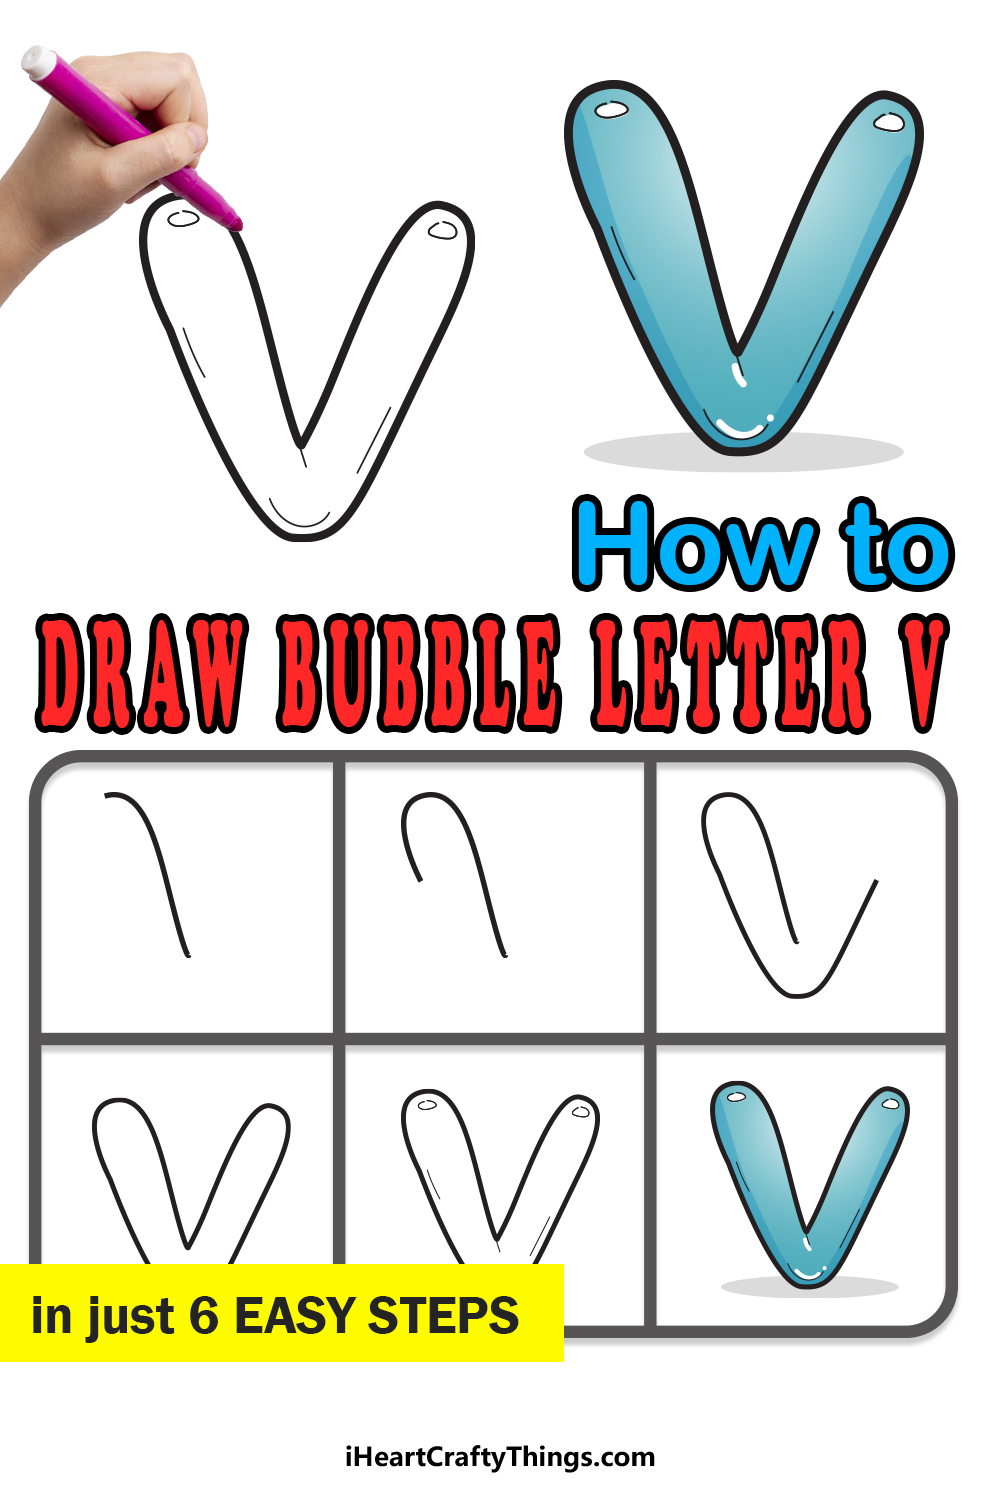 How To Draw Your Own Bubble V step by step guide